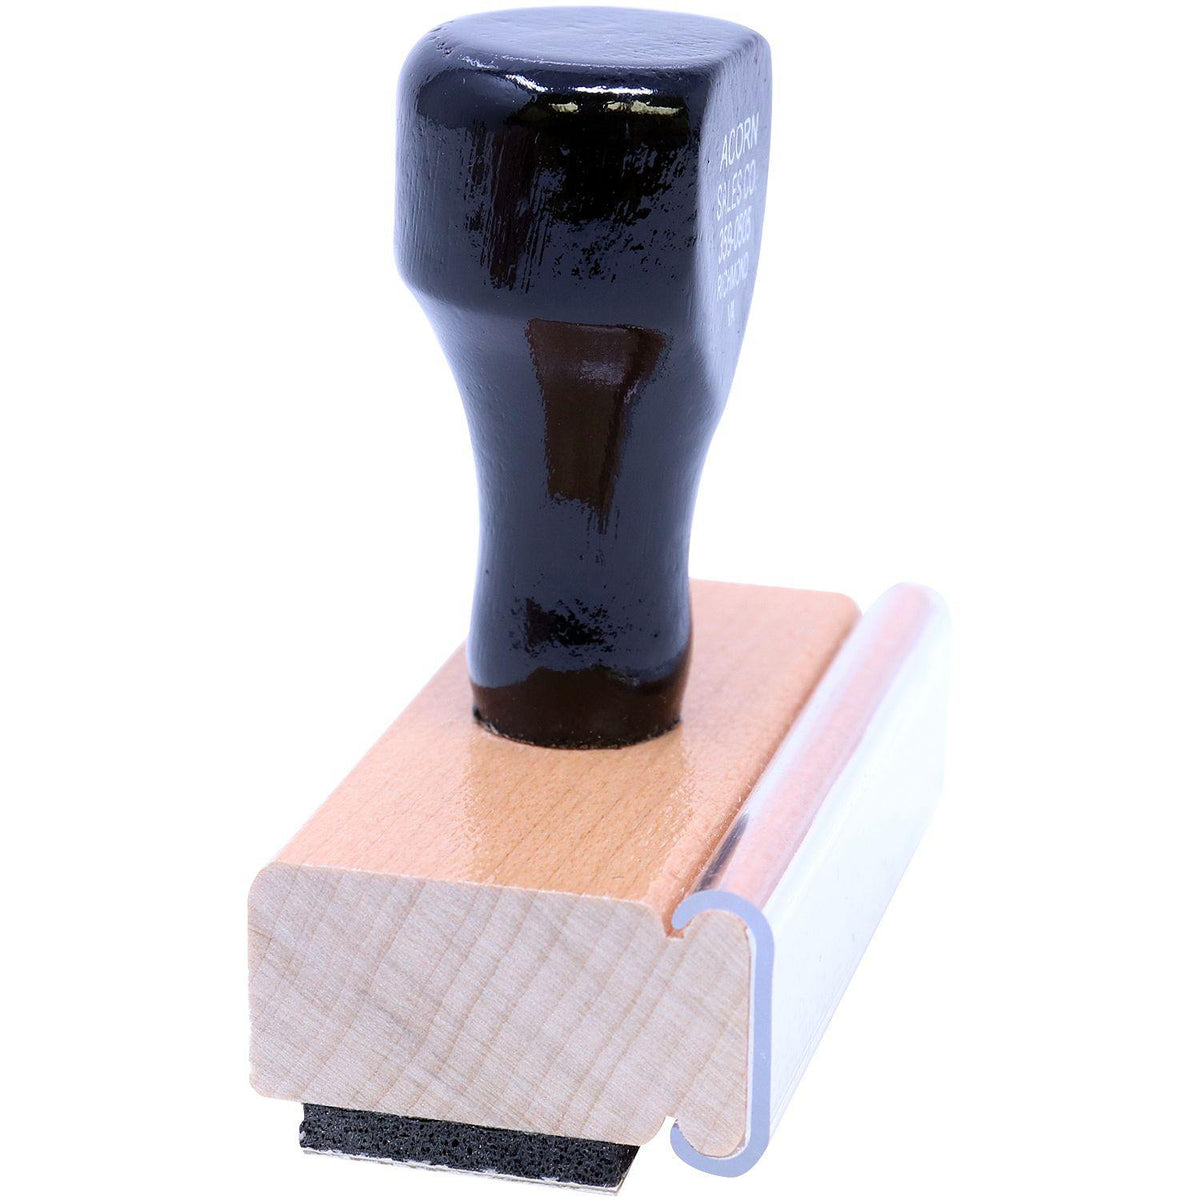 Side View of Expreso Rubber Stamp at an Angle